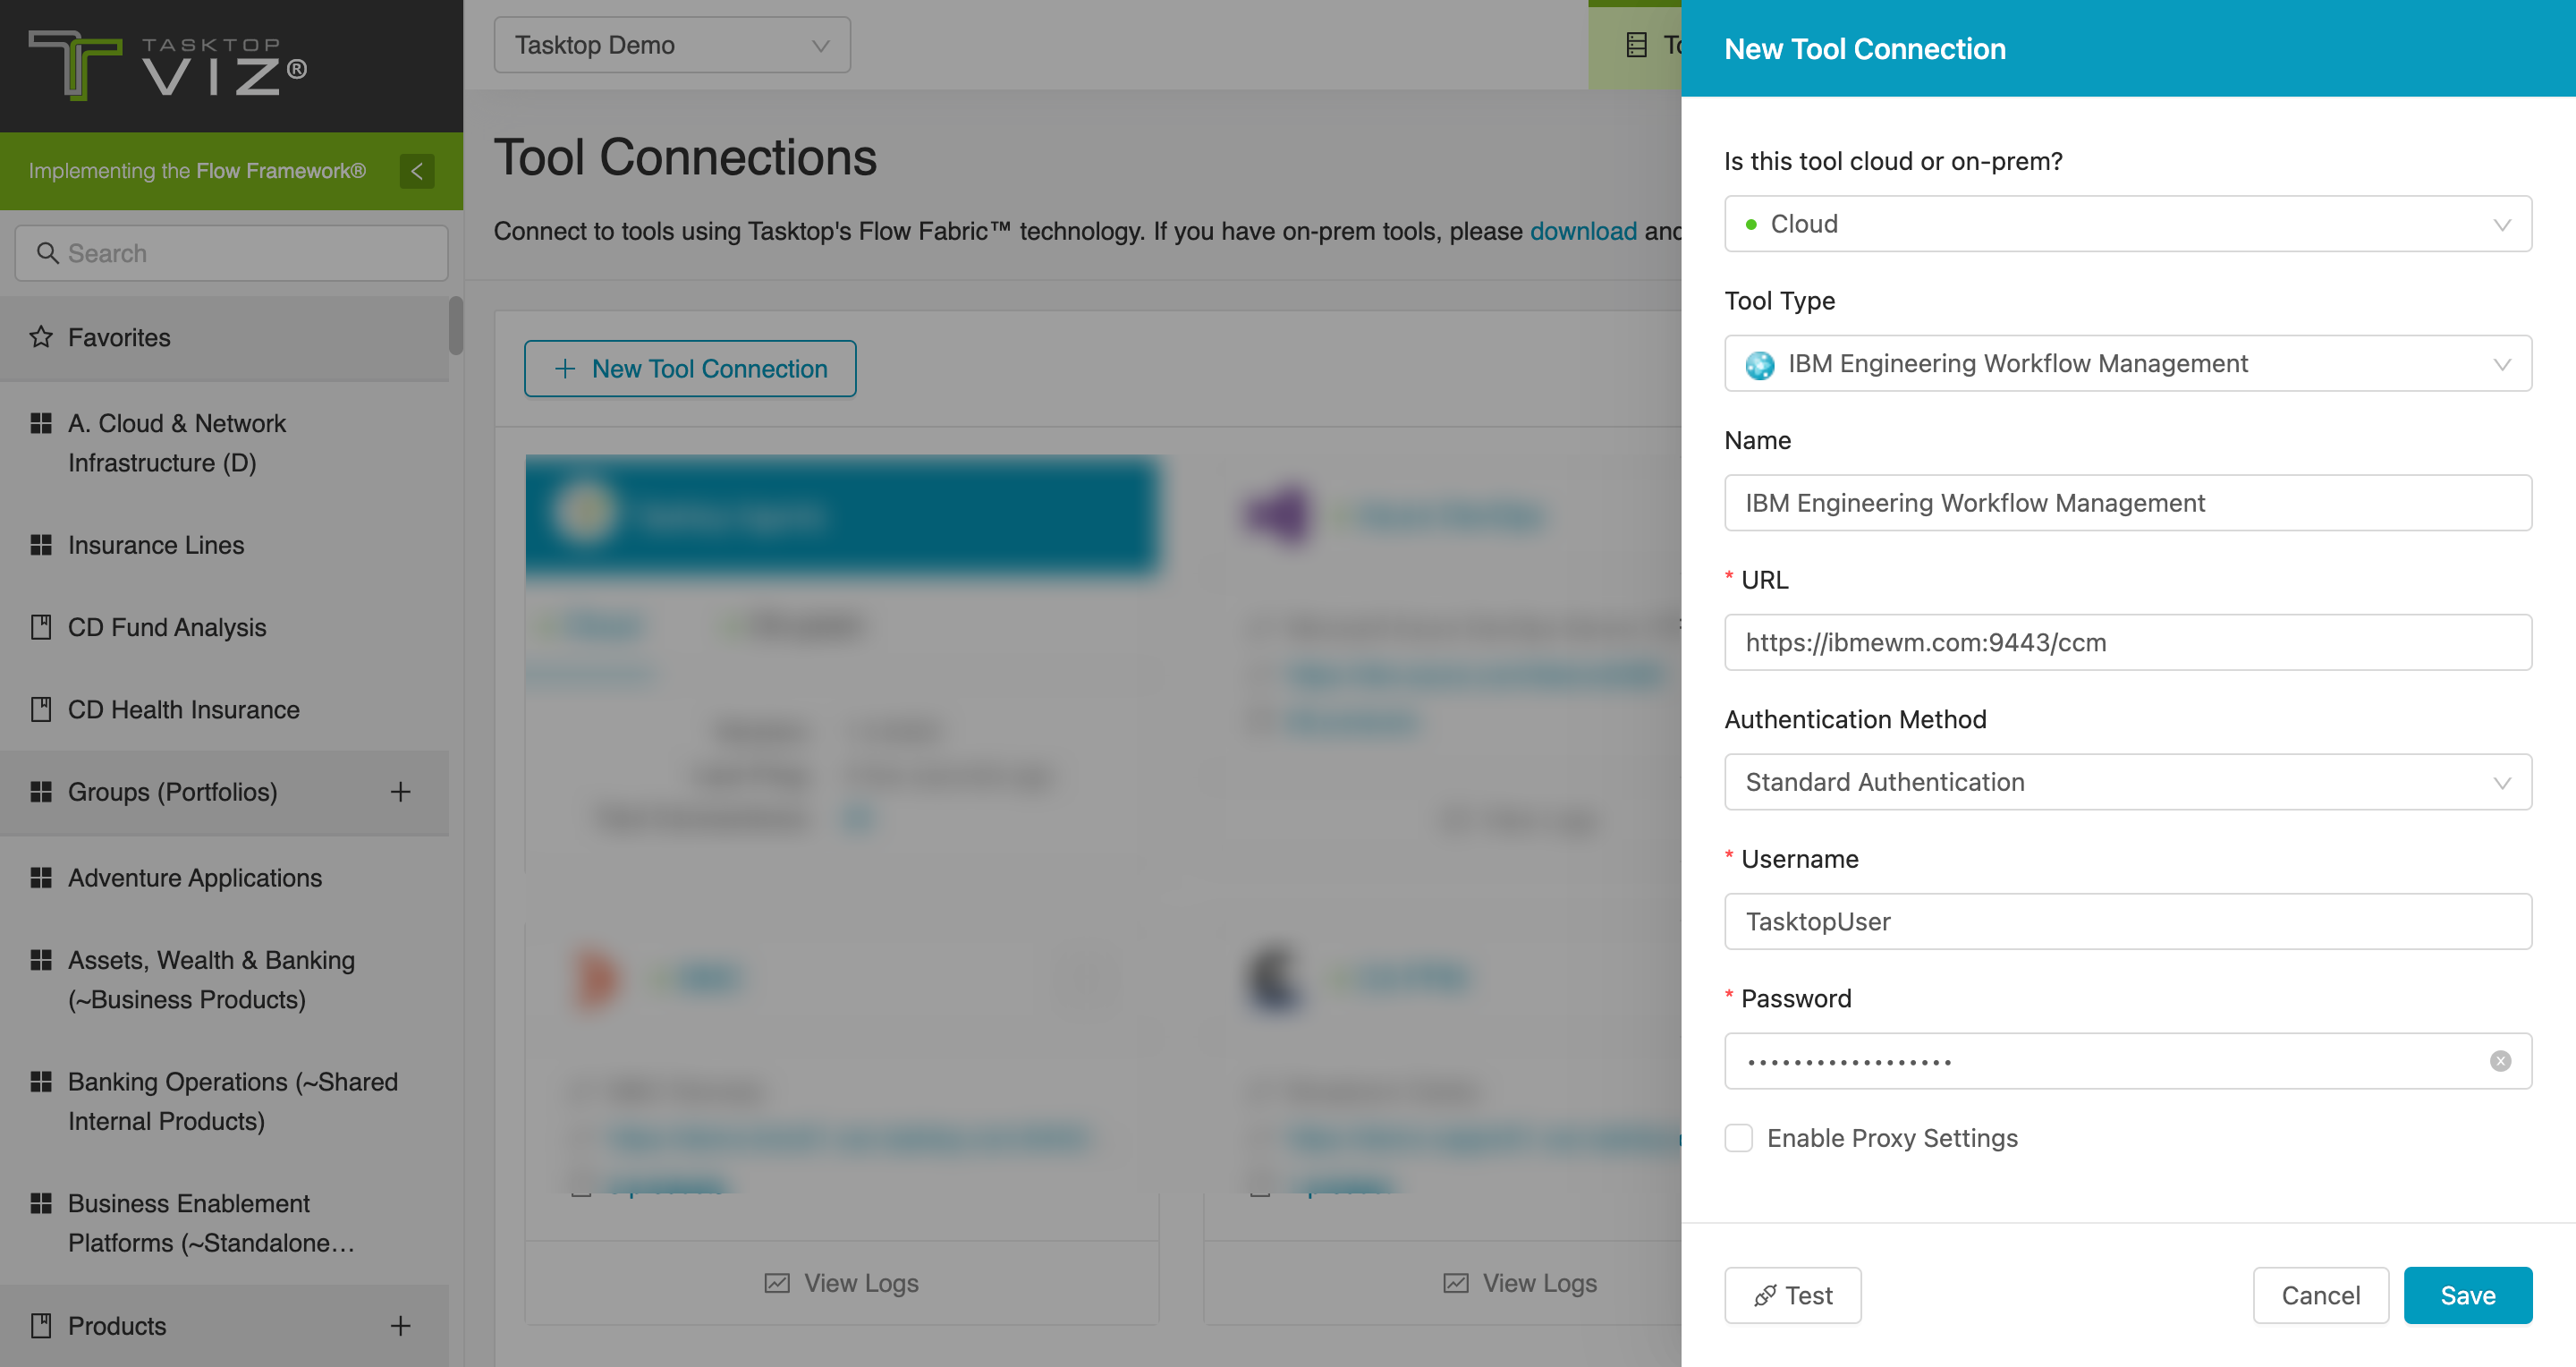 IBM Engineering Workflow Management Tool Connection Screen - Standard Authentication